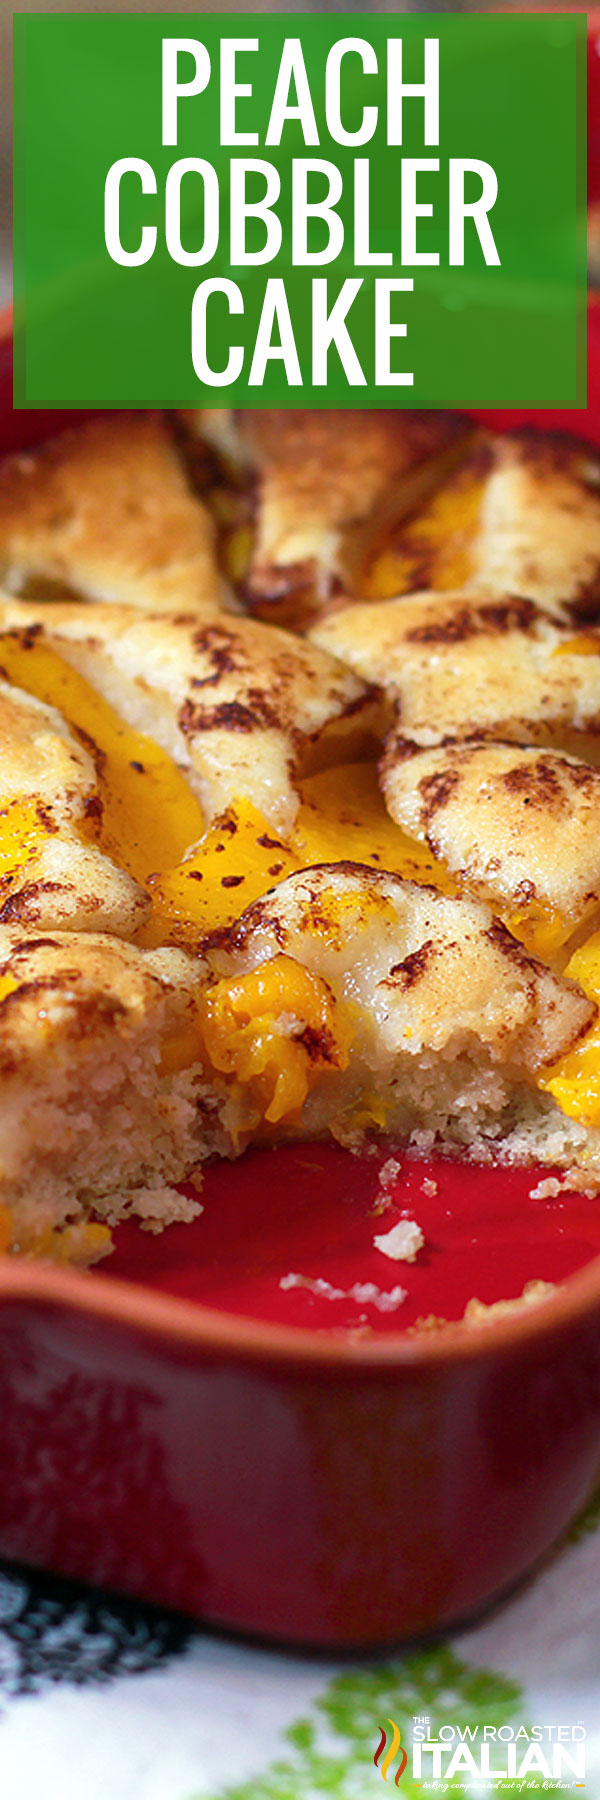 titled image (and shown): peach cobbler cake